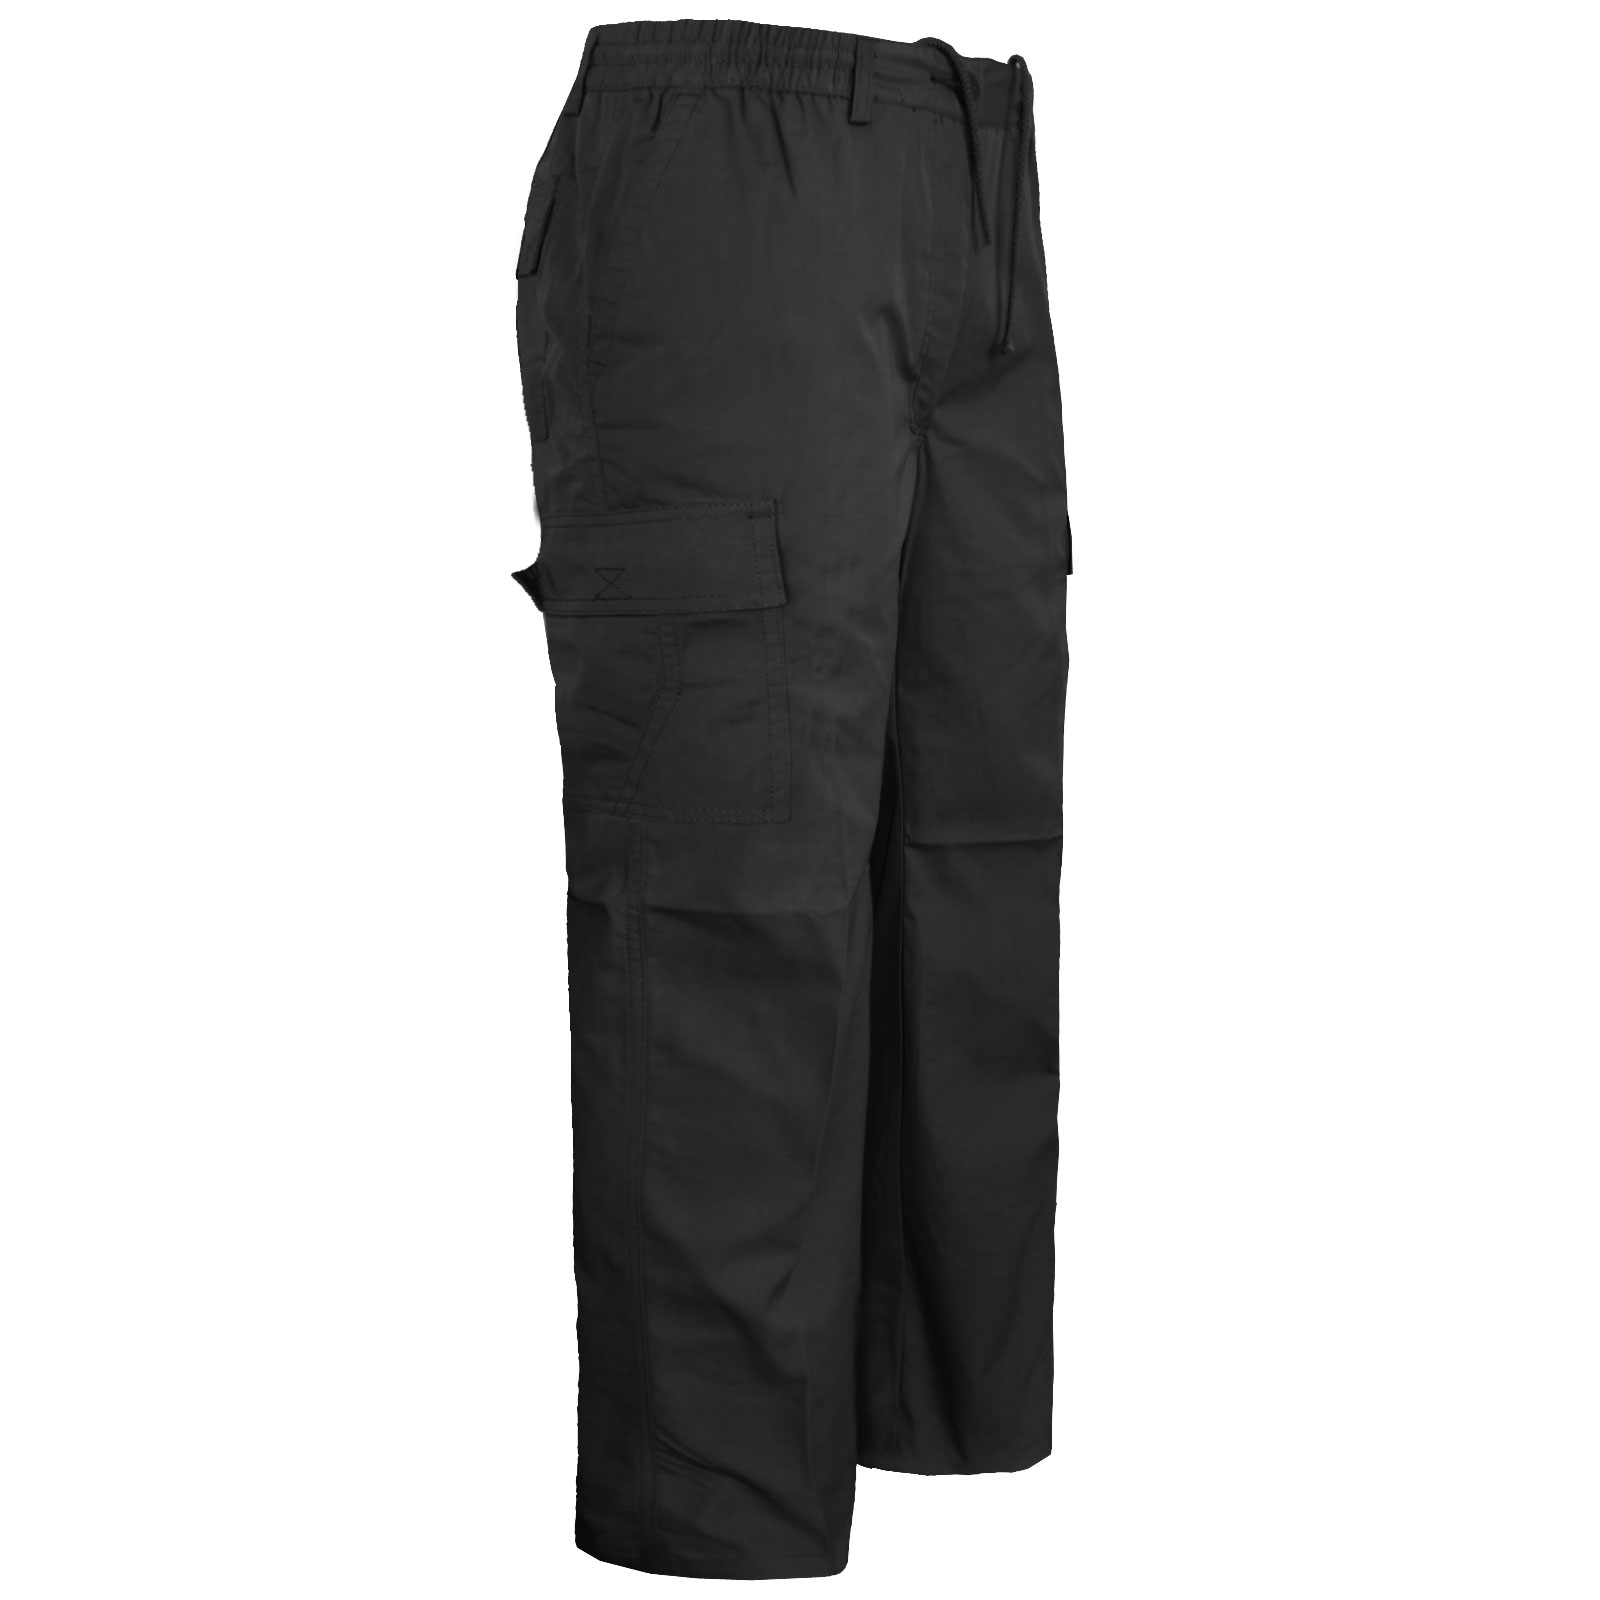 MENS ELASTICATED WAIST TROUSERS CARGO COMBAT PANTS WORK CASUAL RUGBY BOTTOMS 6XL